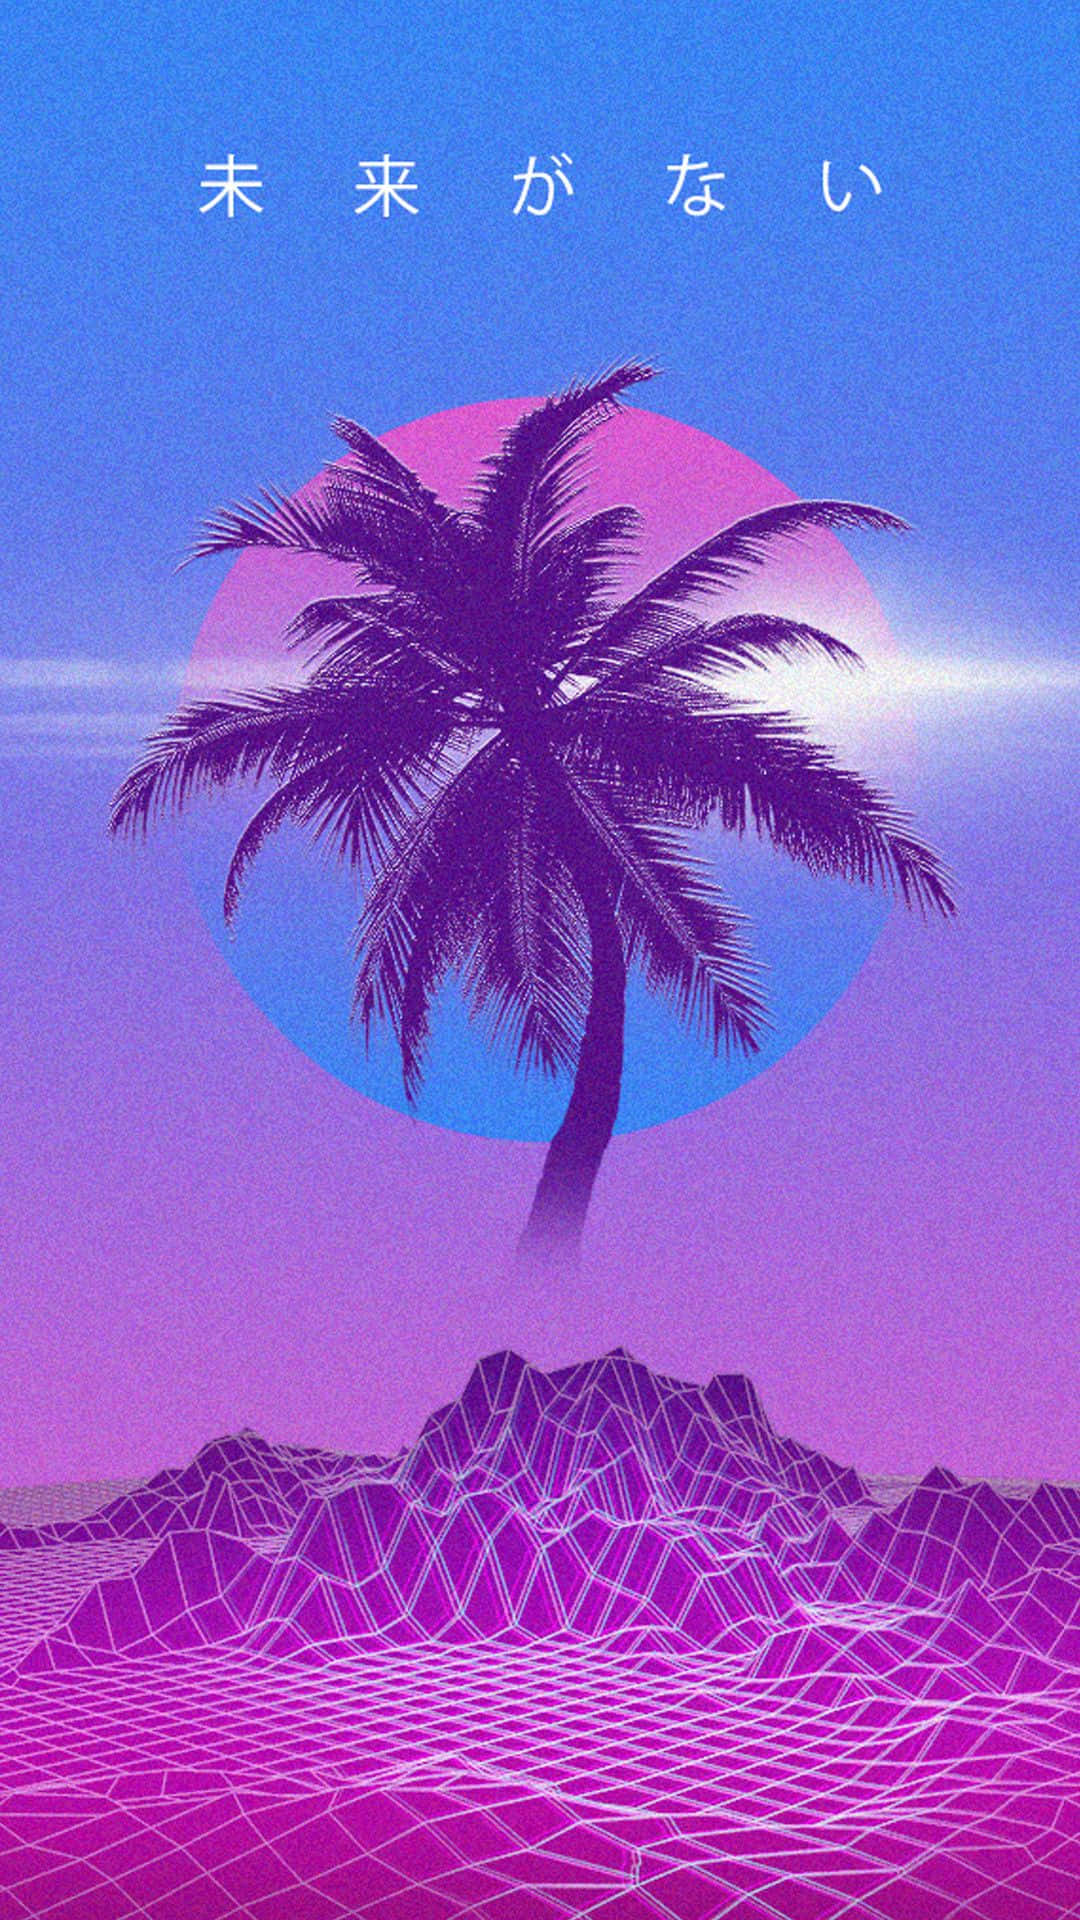 "Take a Trip Down Memory Lane with This Vibrant 80's Retro Background"